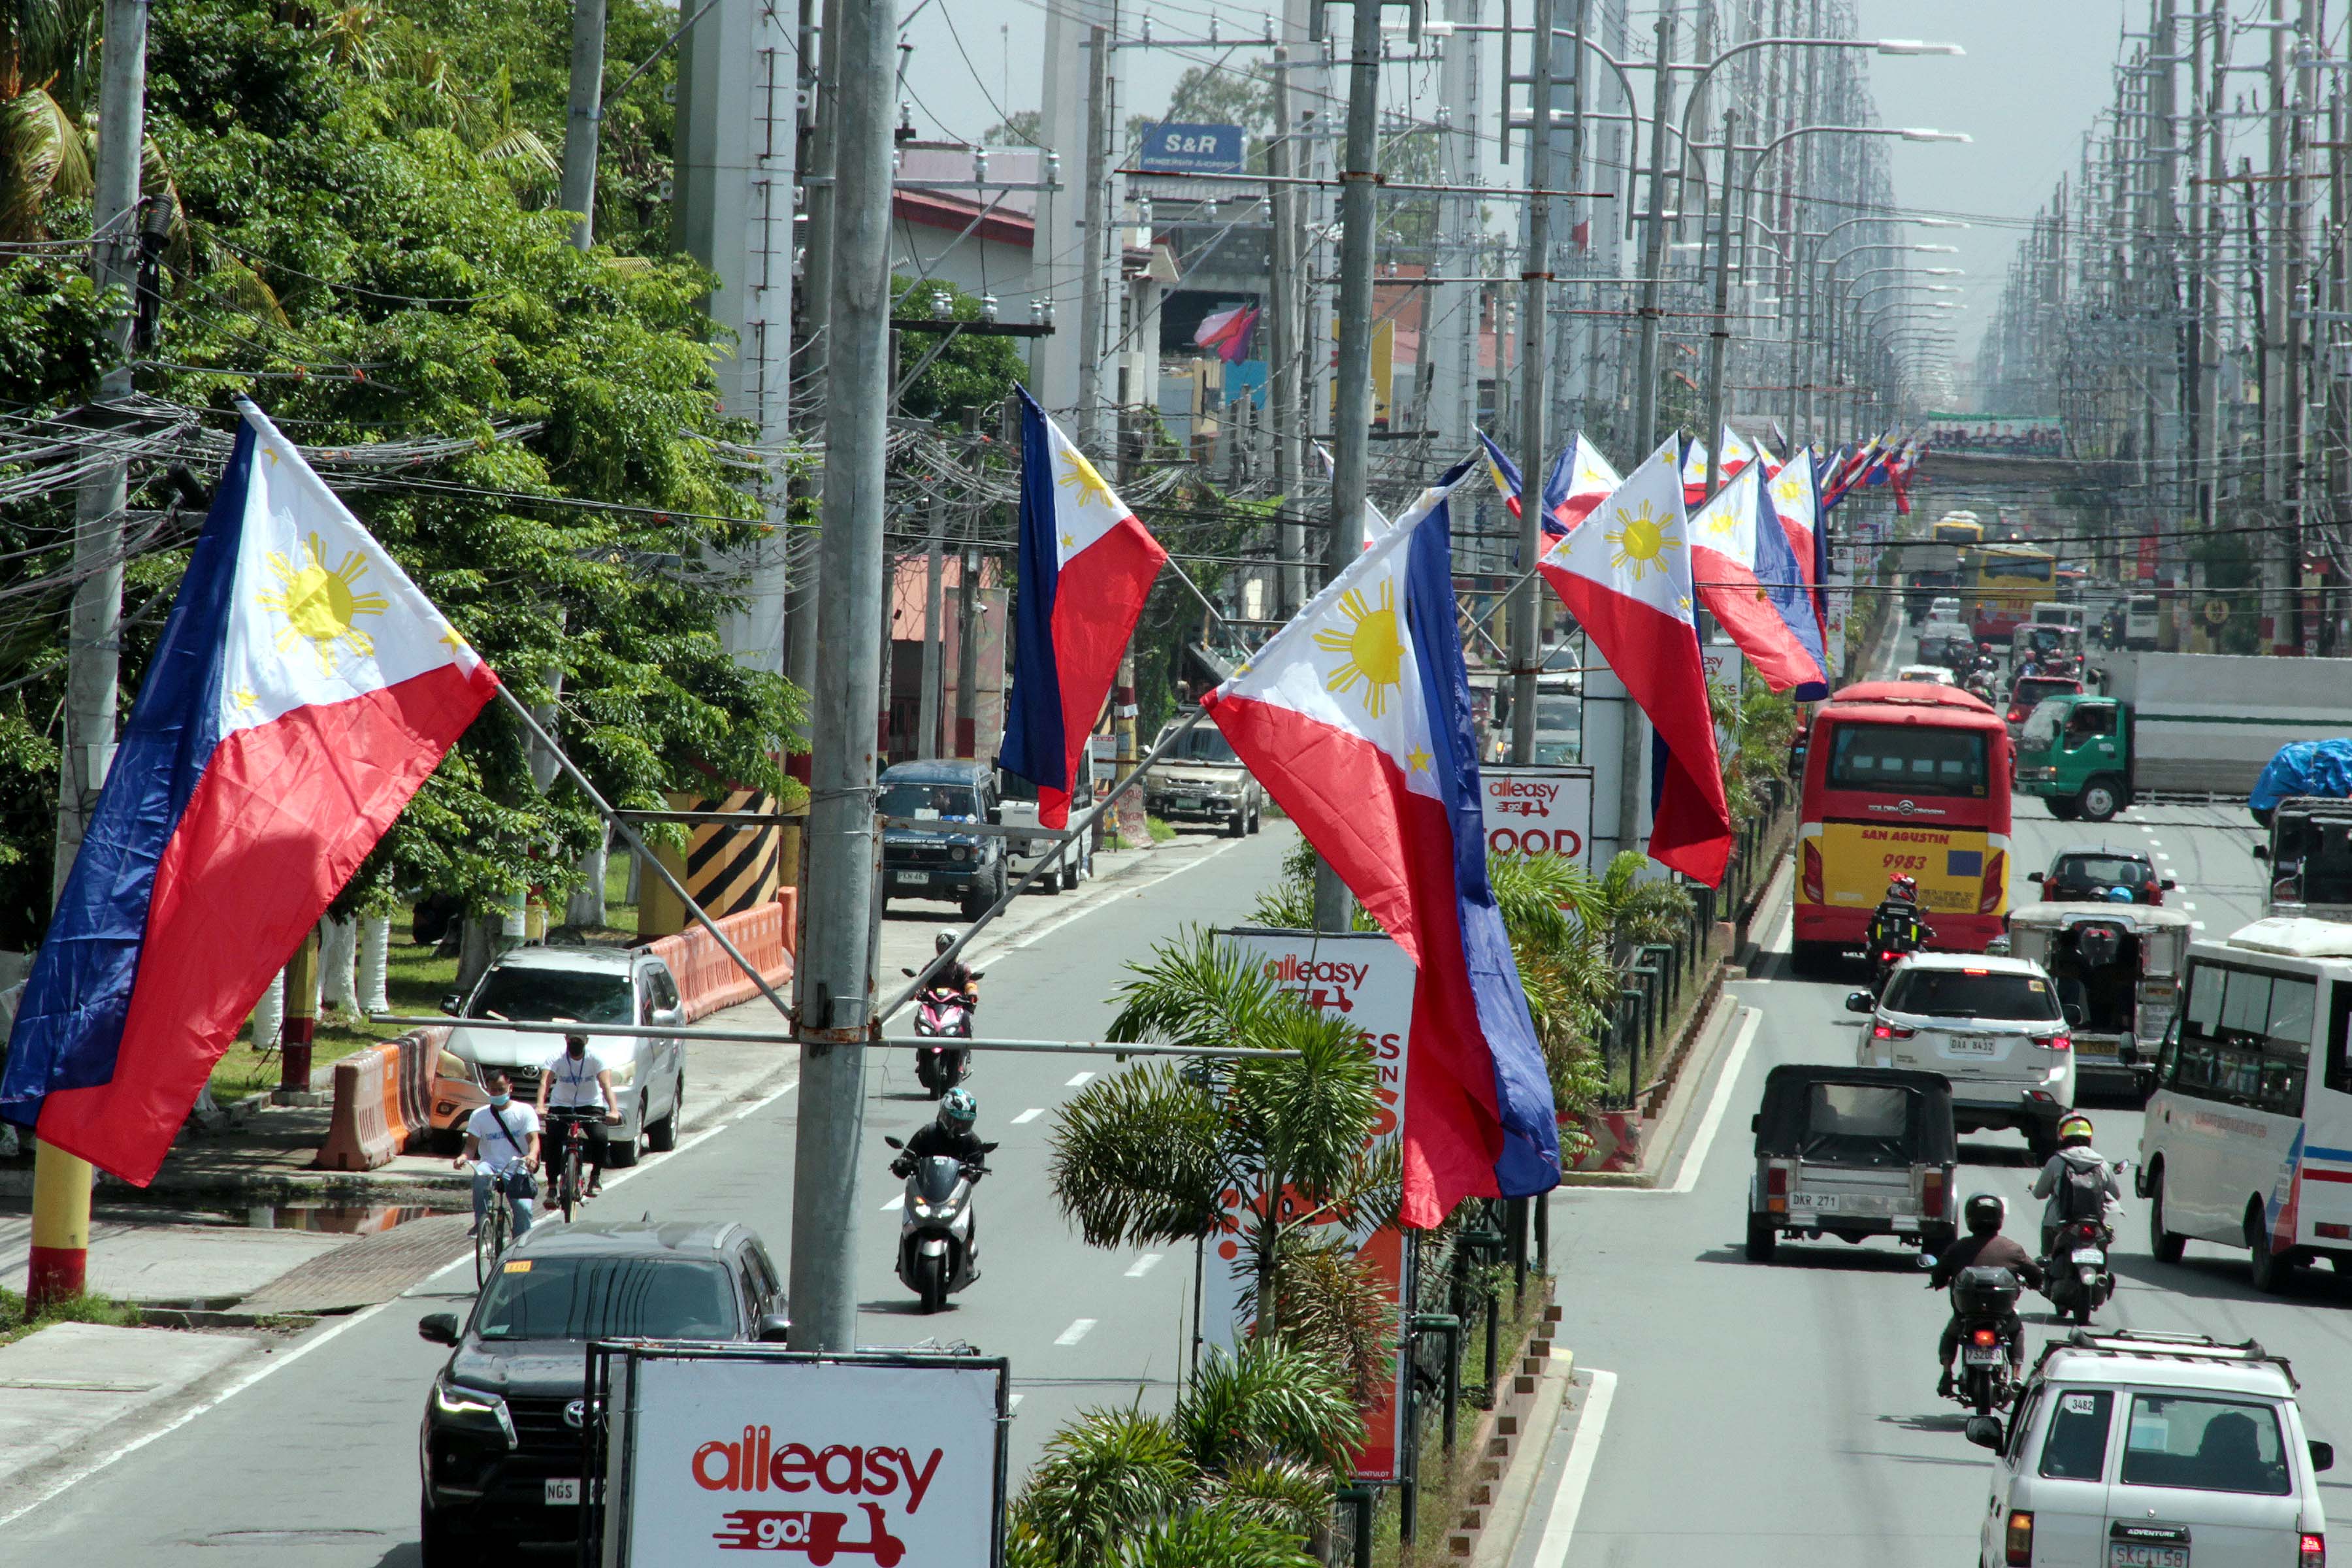 Imus is known as Flag Capital of the Philippines